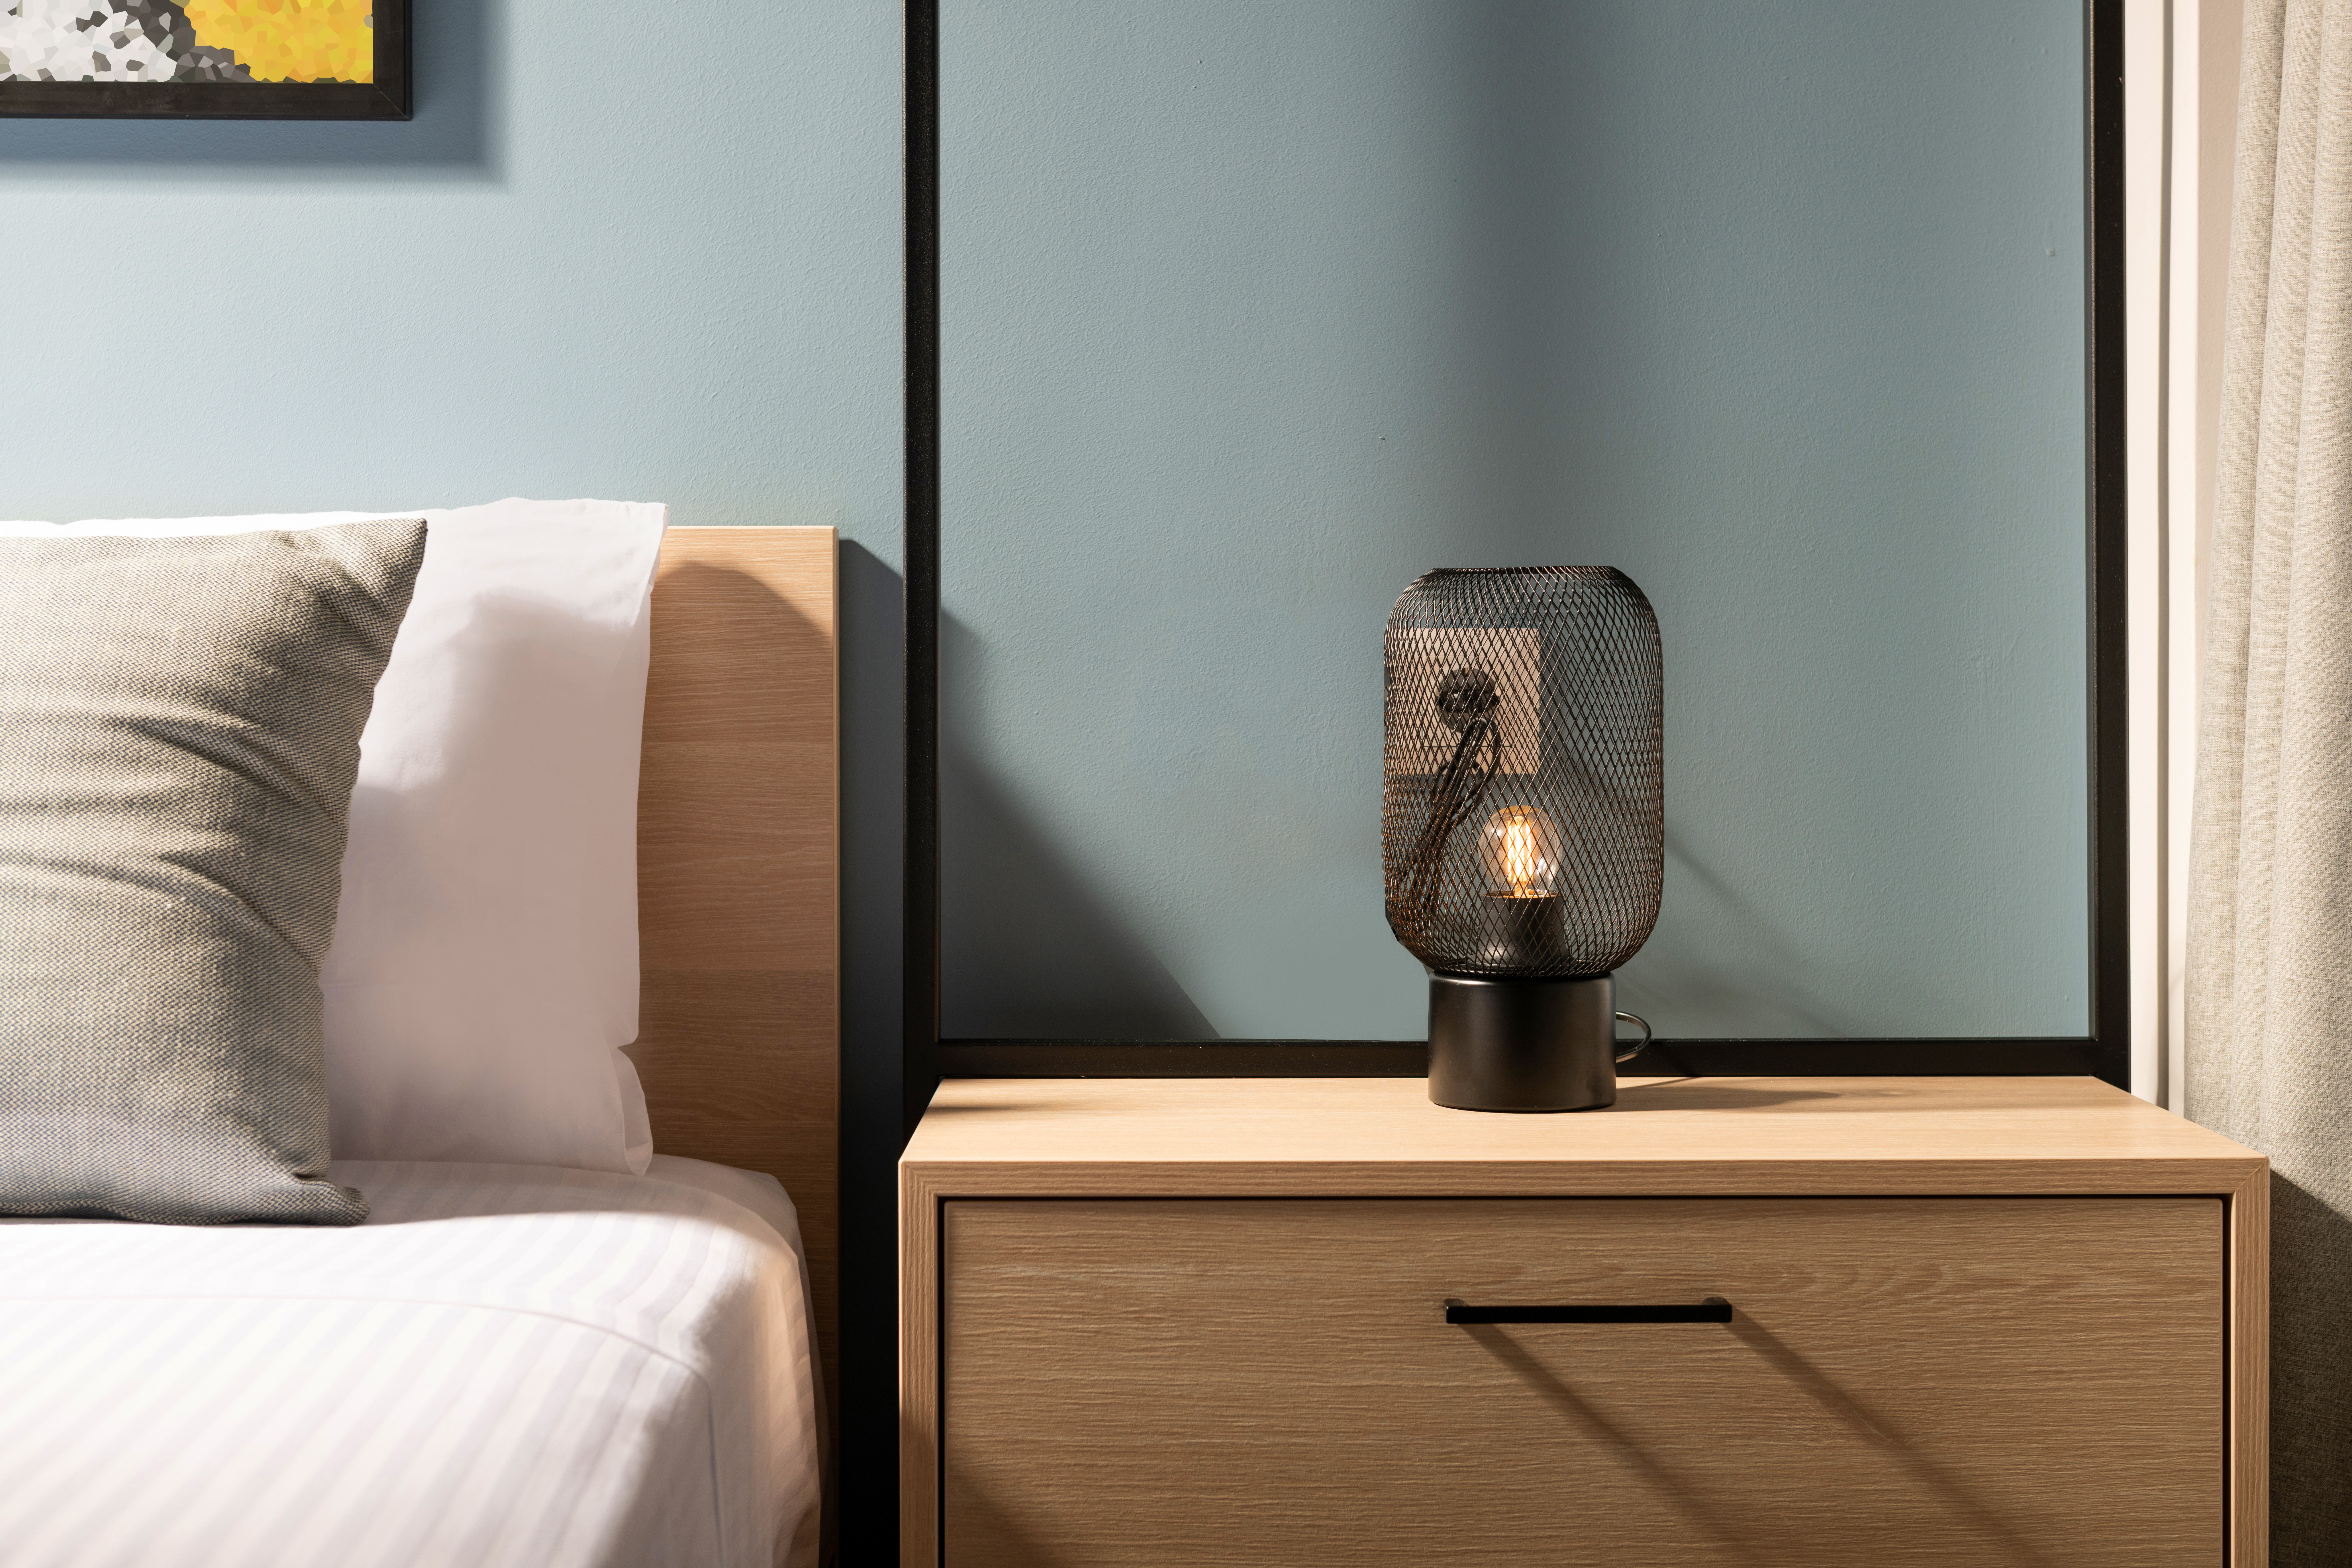 An industrial lamp shown on a wooden nightstand 